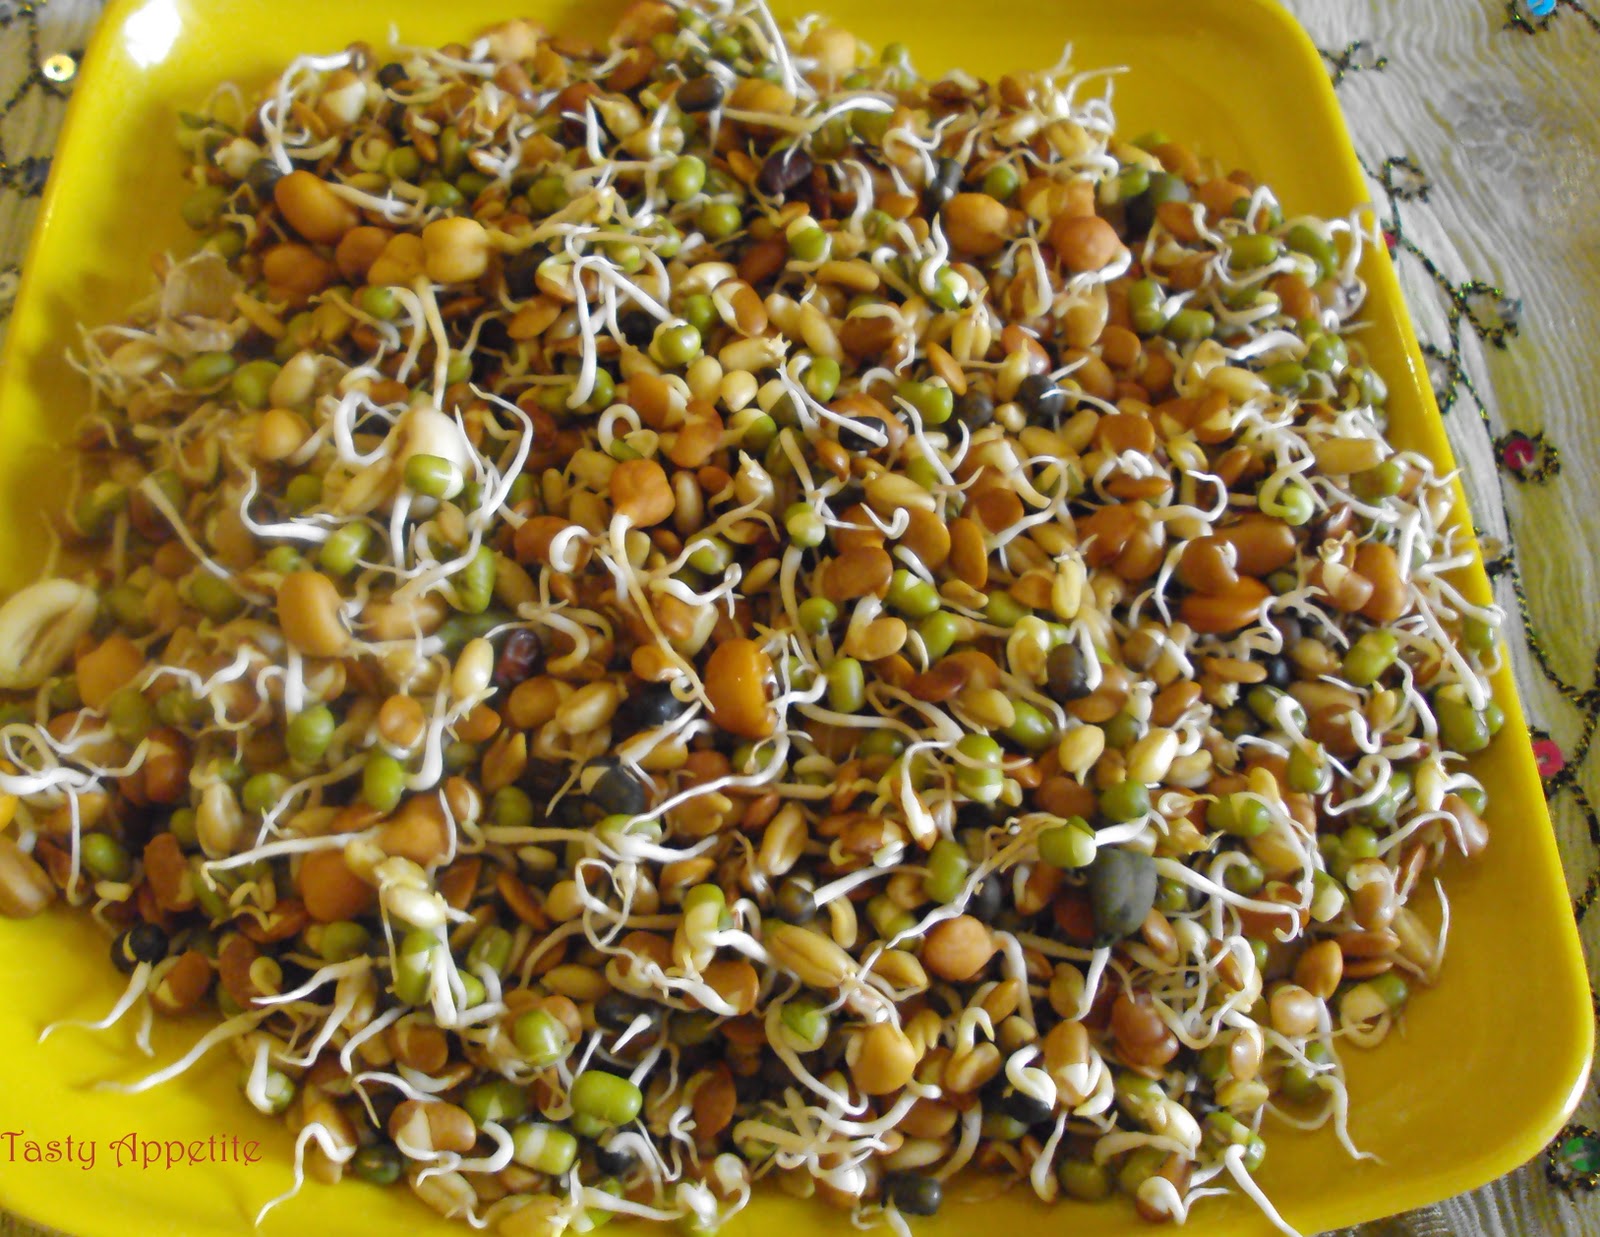 Sprouts for your daily health